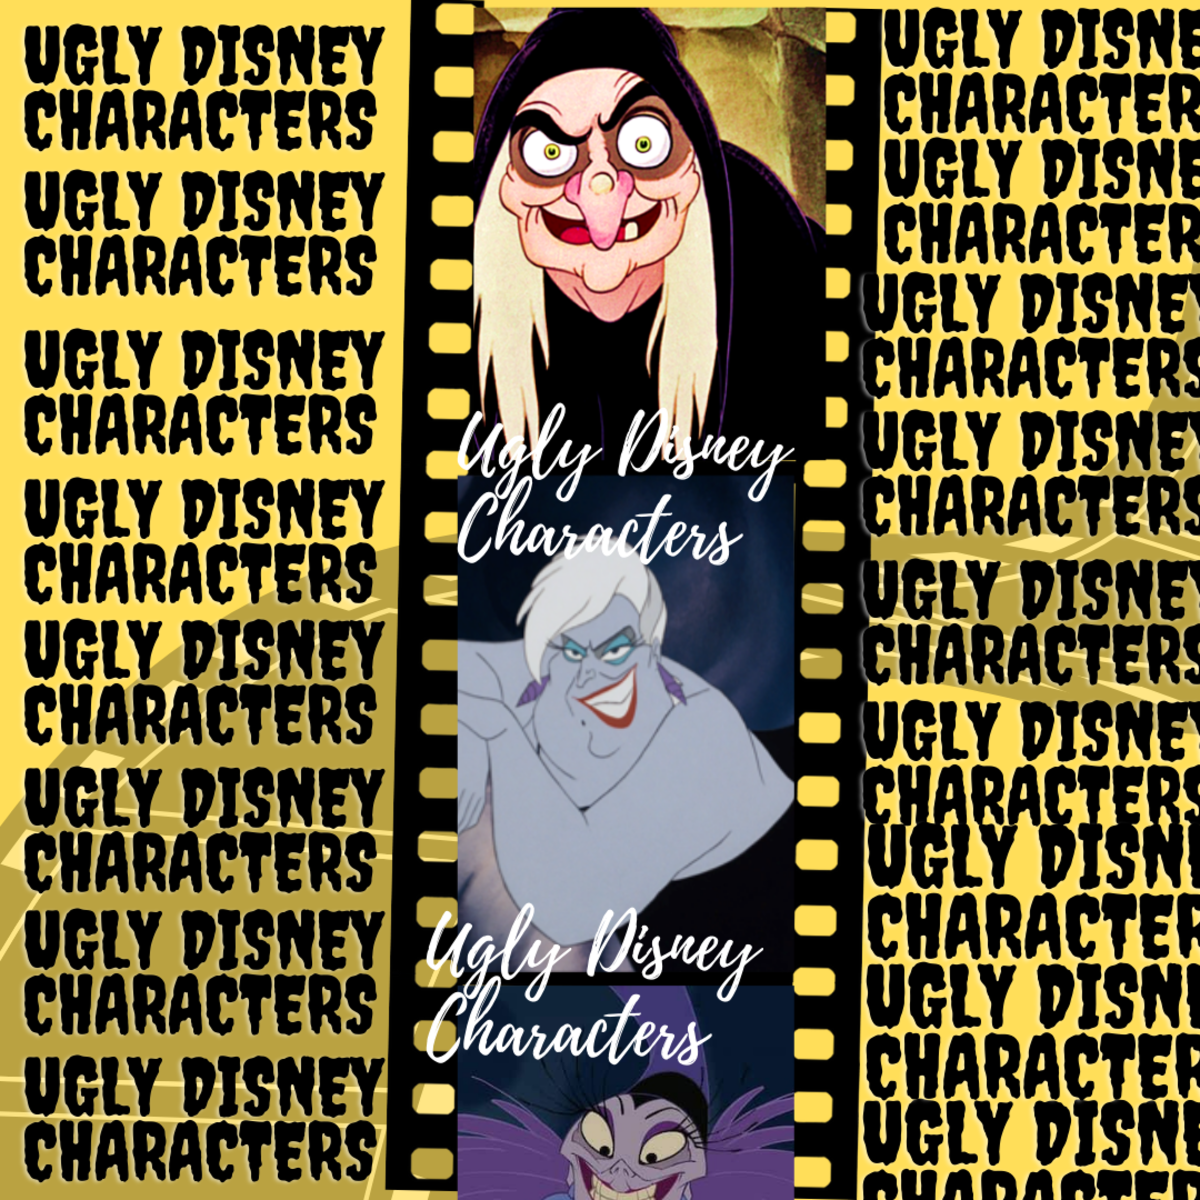 50 Ugly Disney Characters